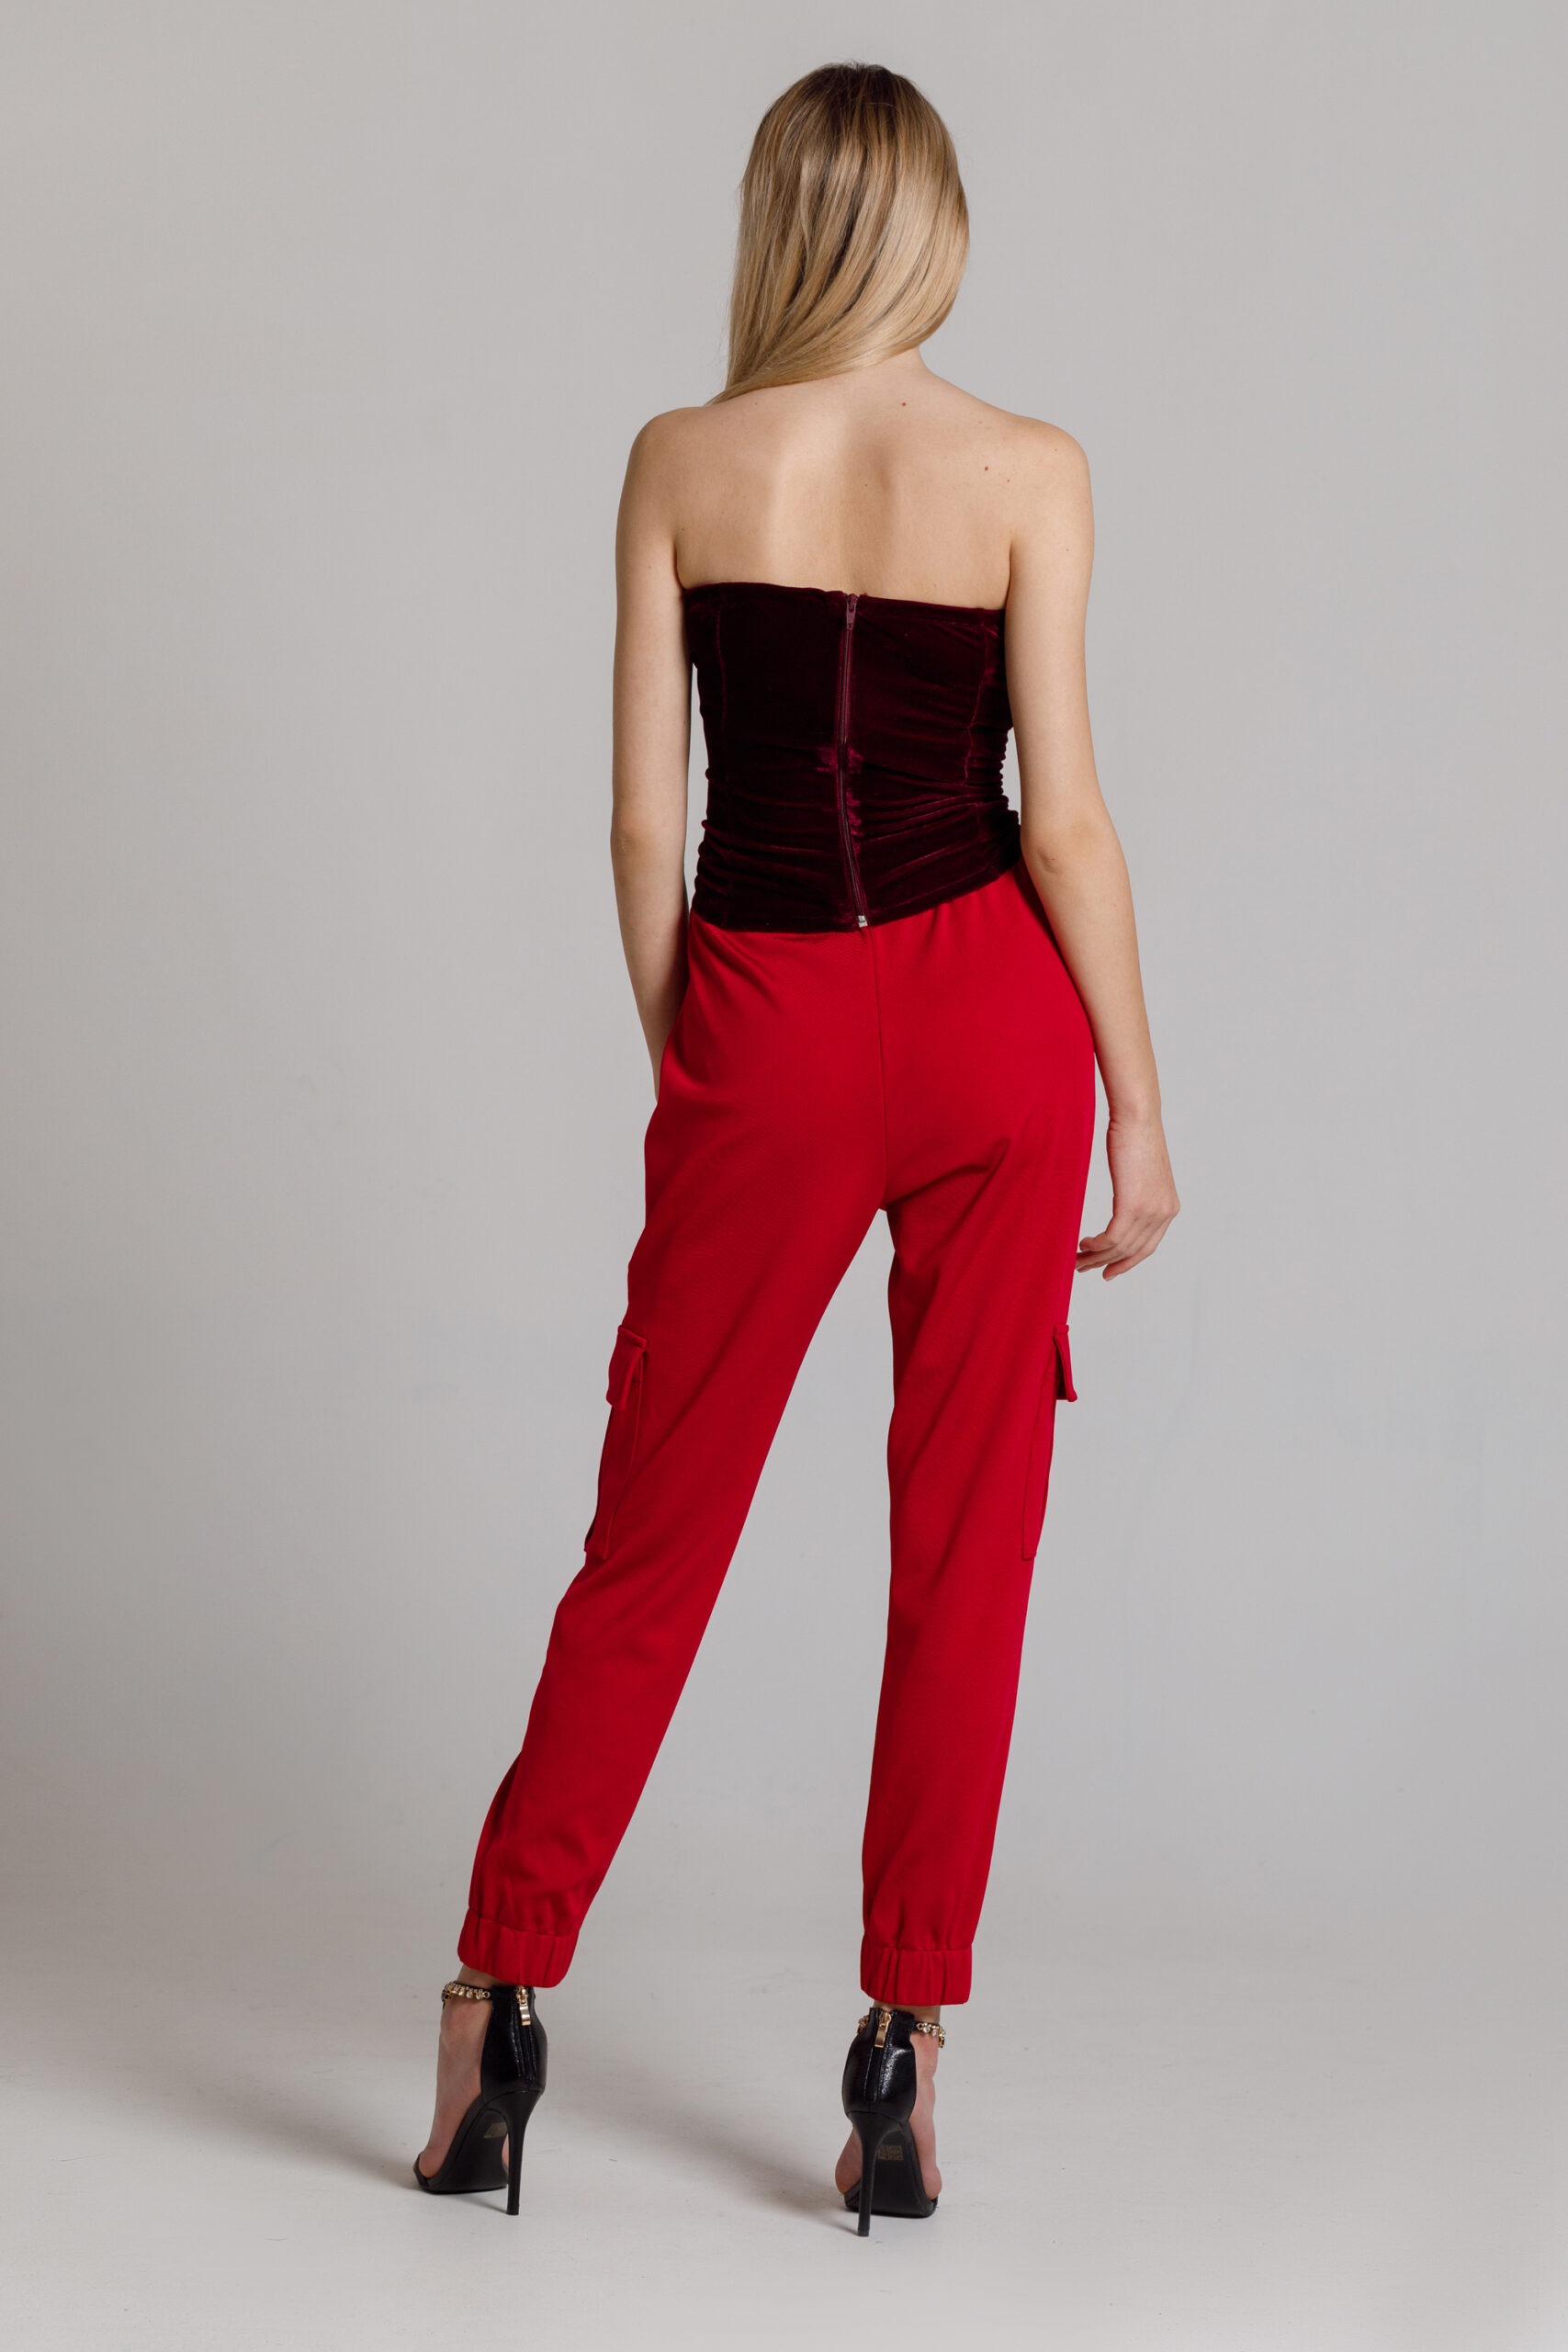 Burgundy VAN trousers with applied pockets. Natural fabrics, original design, handmade embroidery